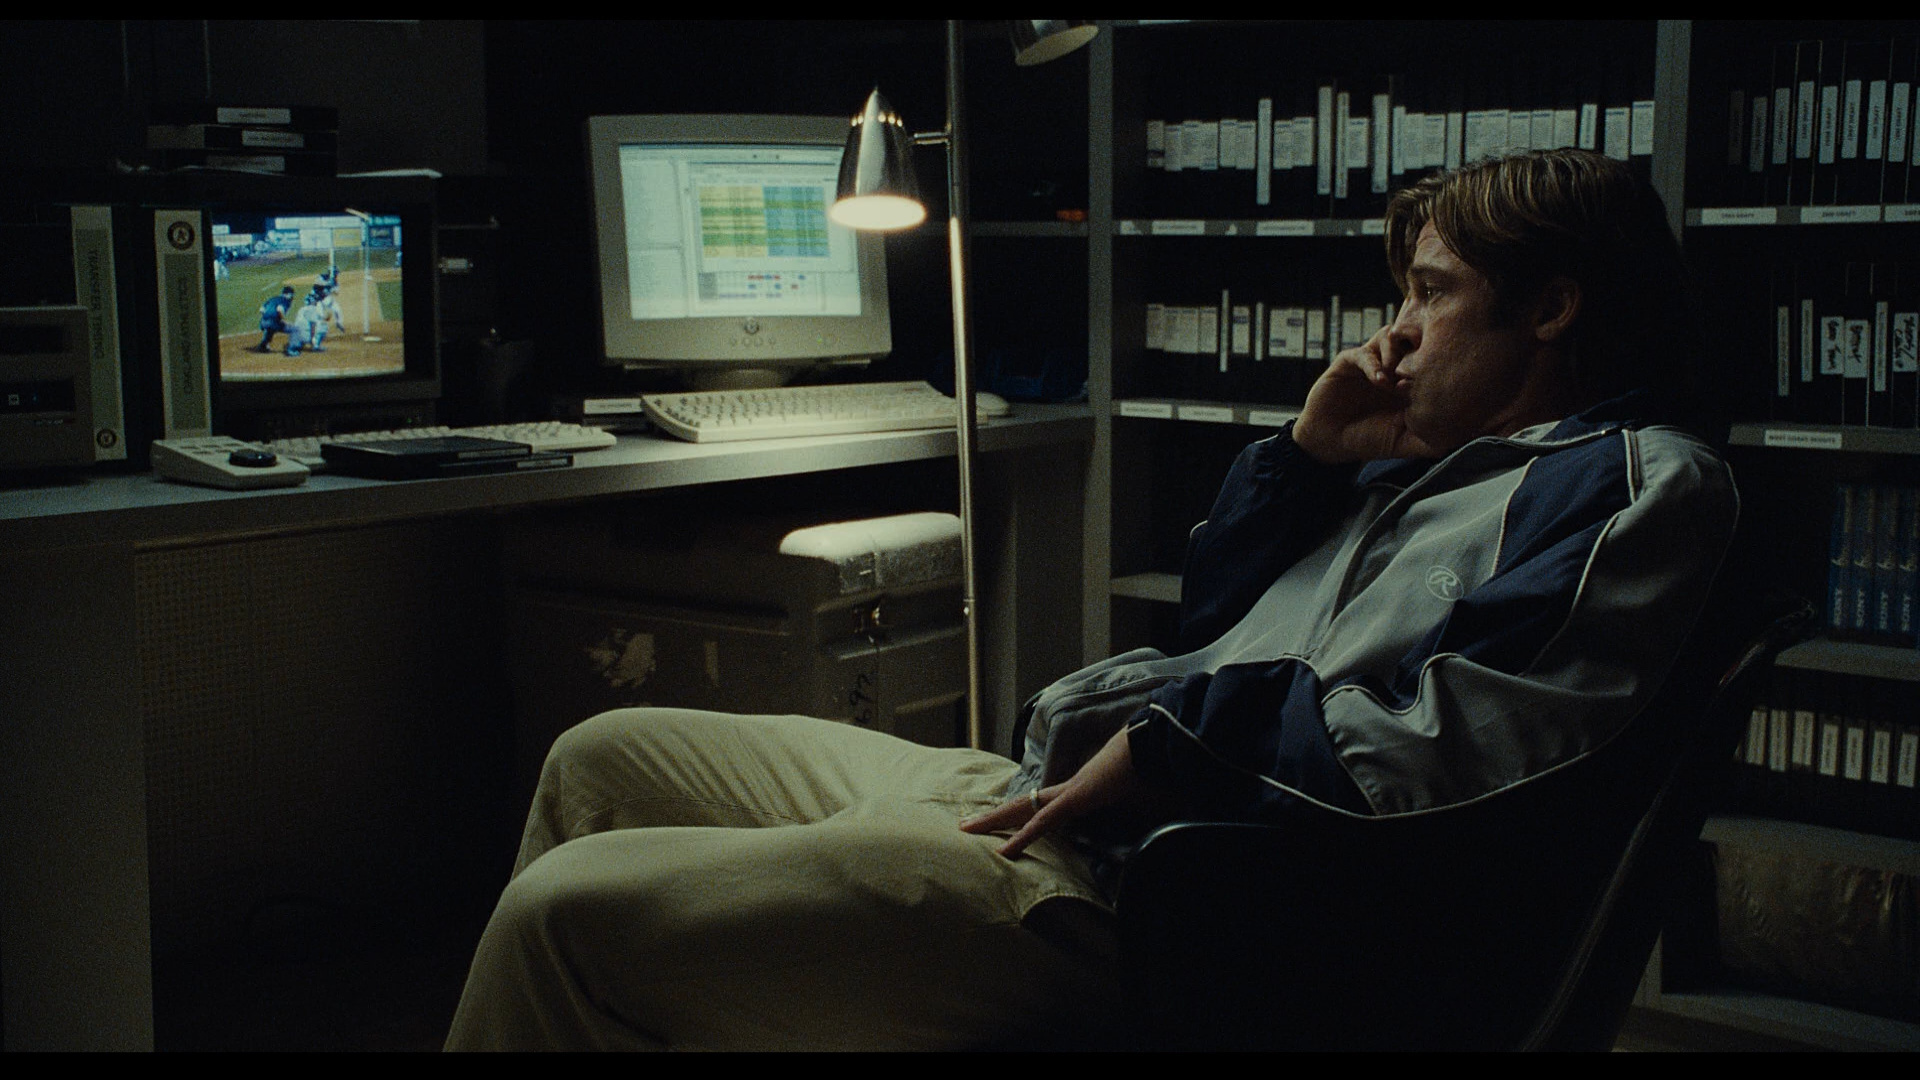 Moneyball: The film grossed $75.6 million in the United States and Canada. 1920x1080 Full HD Wallpaper.